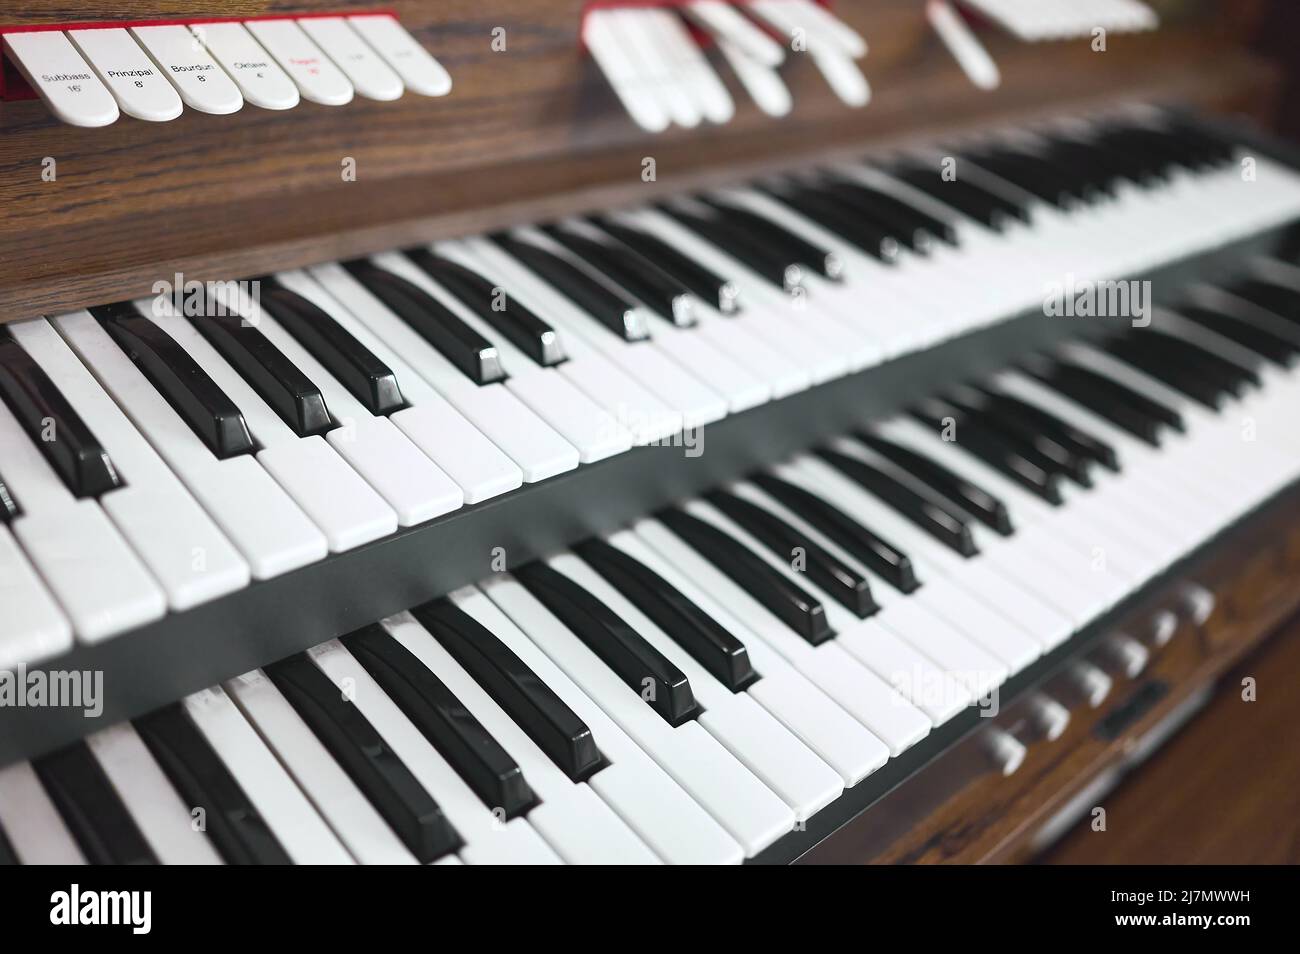 detailf of a keyboards, console, pedals of an organ in a church Stock Photo